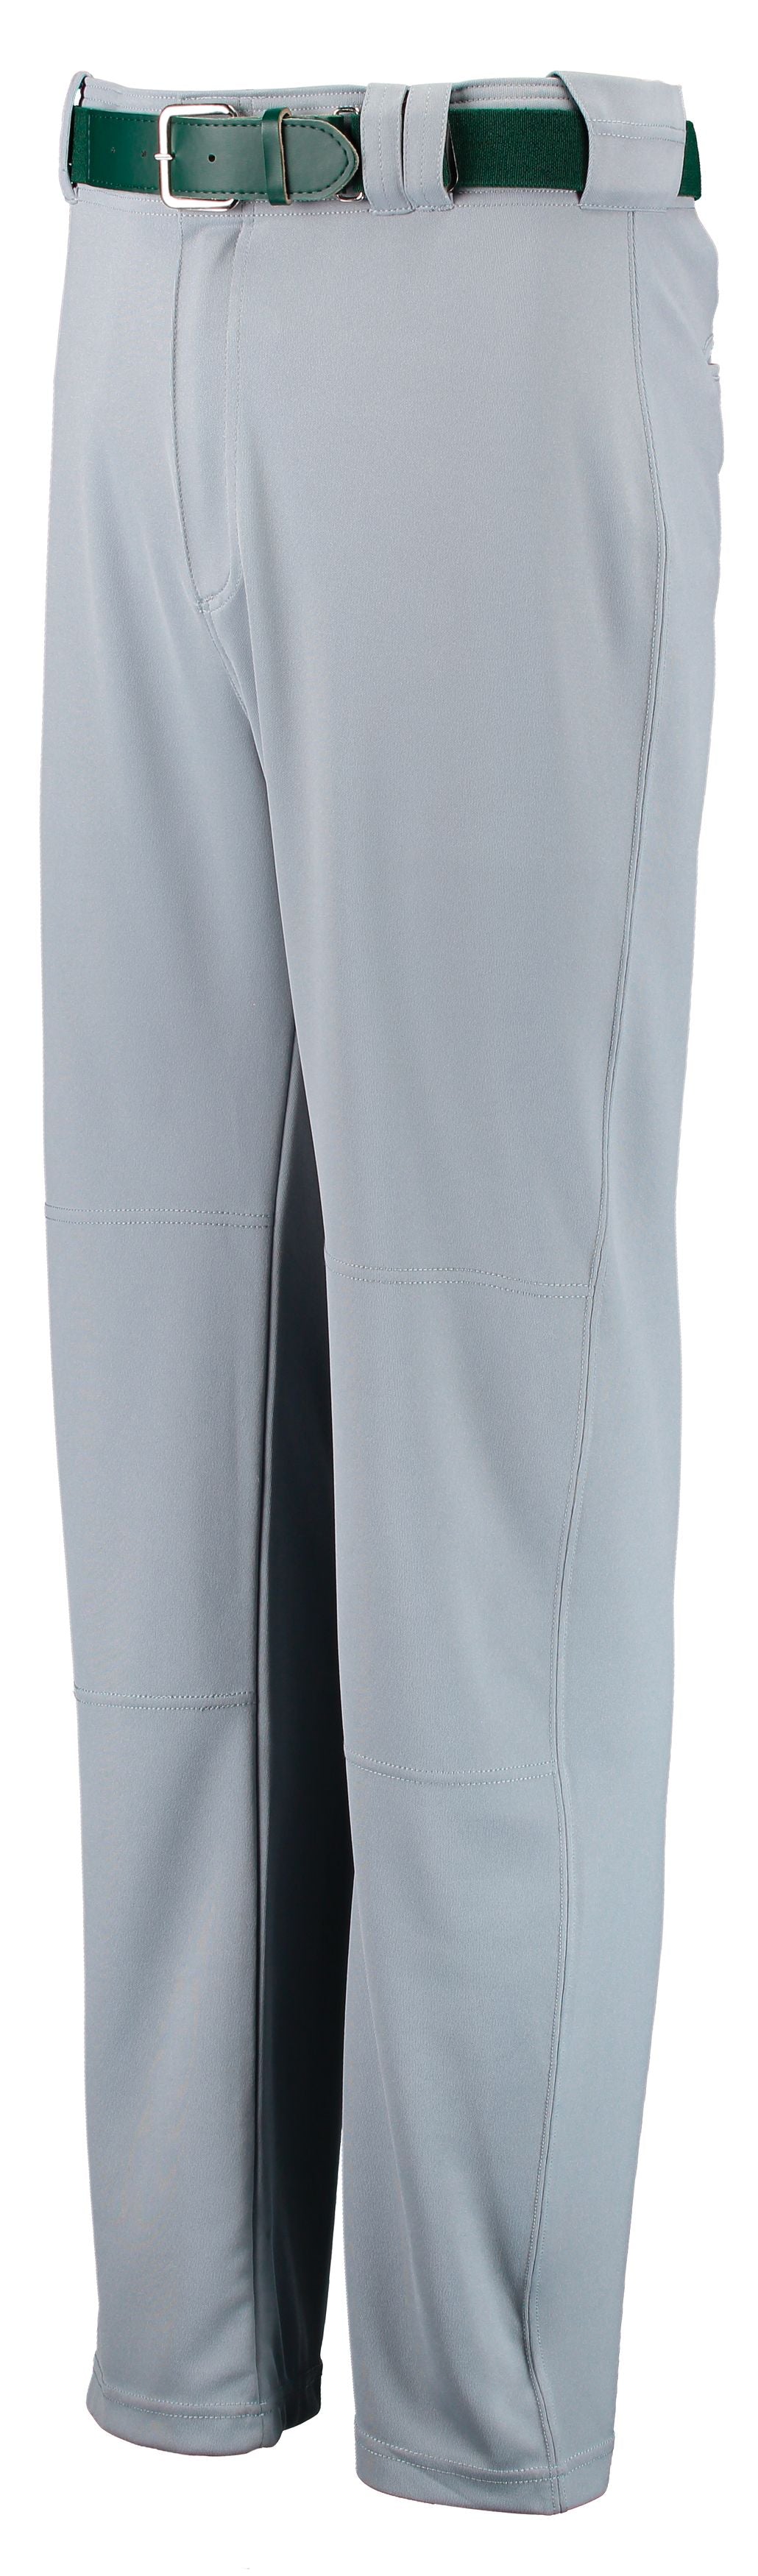 Russell Athletic Youth Boot Cut Game Pant in Baseball Grey  -Part of the Youth, Youth-Pants, Pants, Baseball, Russell-Athletic-Products, All-Sports, All-Sports-1 product lines at KanaleyCreations.com